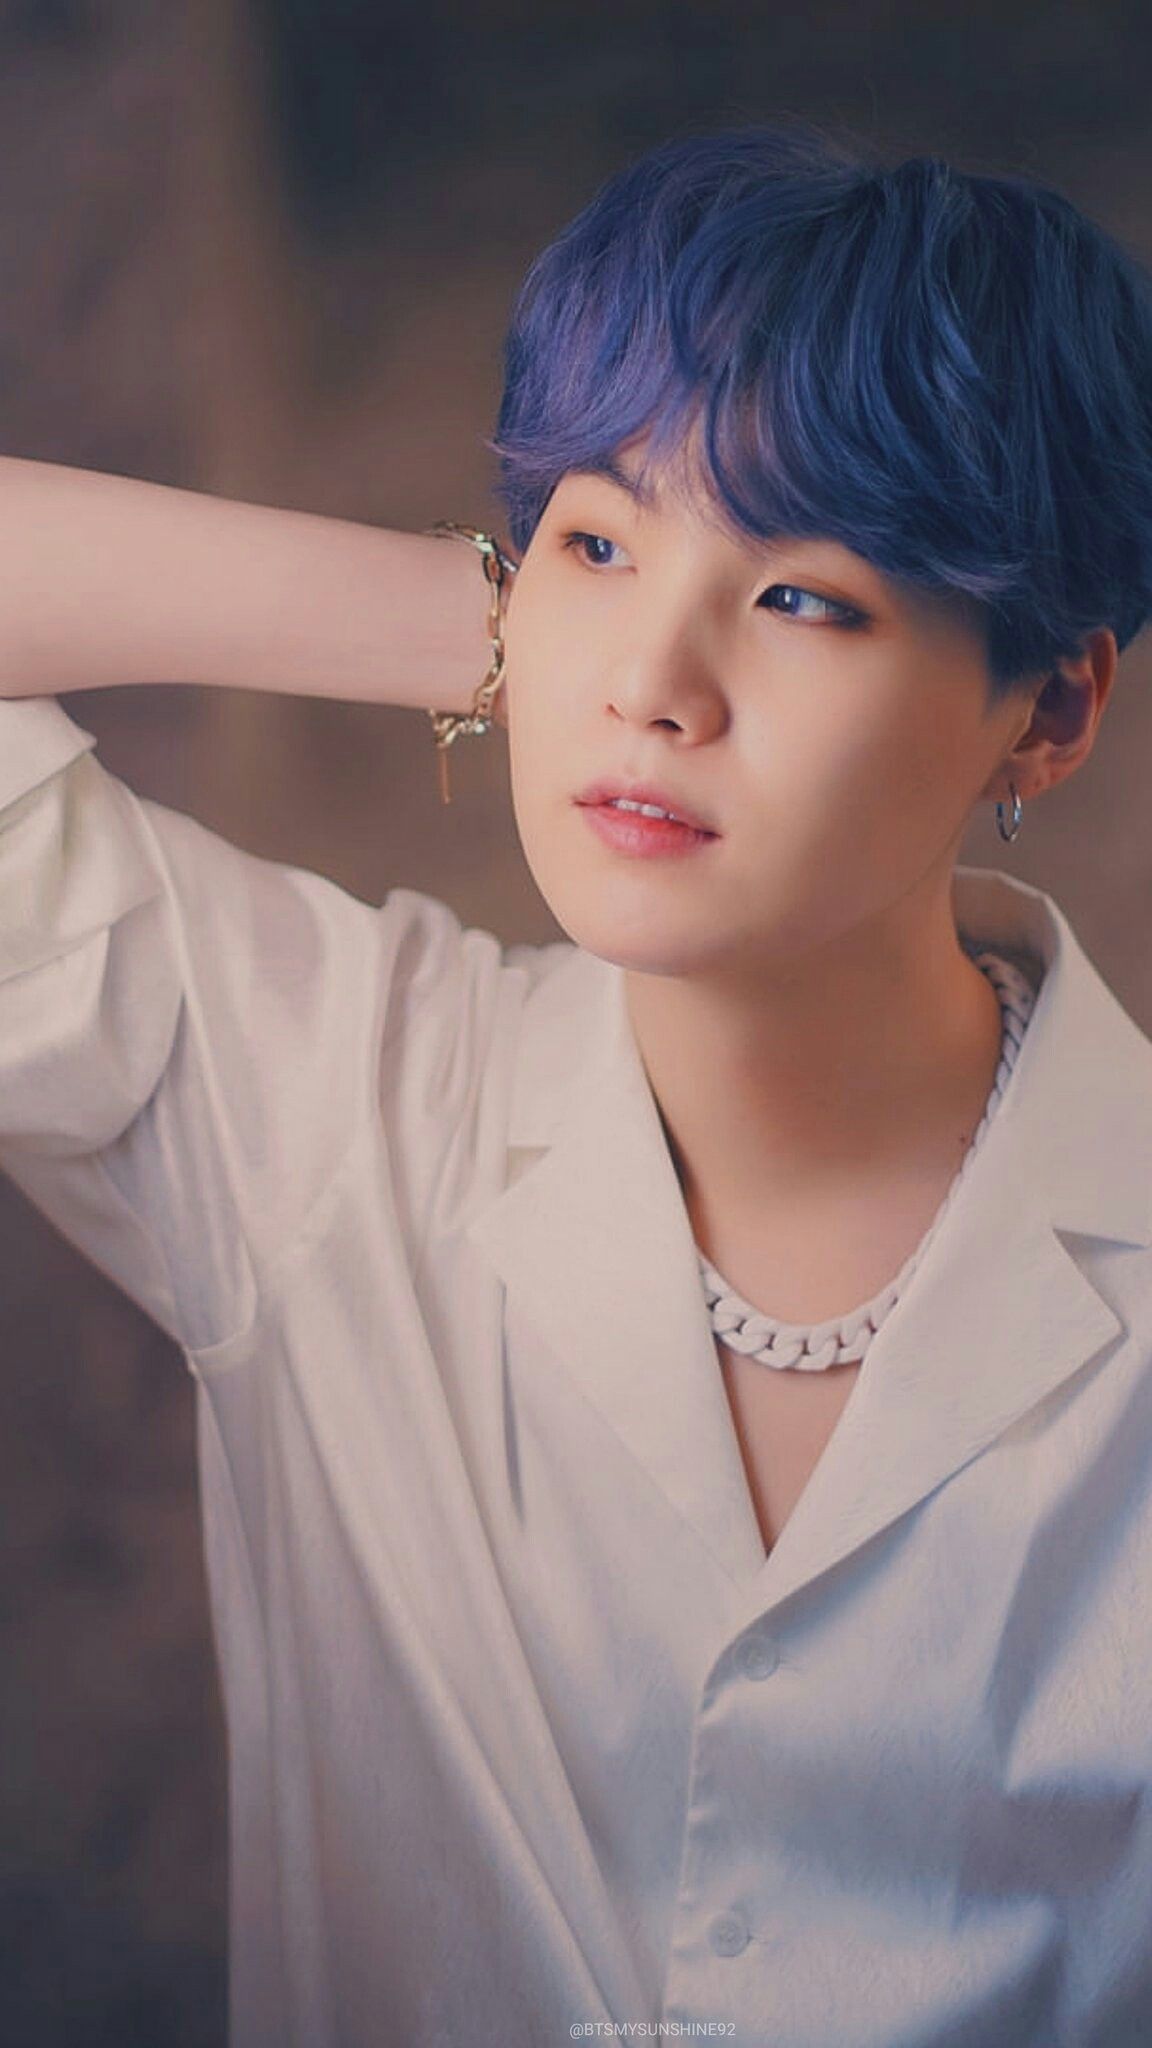 btss-suga-makes-a-surprising-cameo-in-maxs-blueberry-eyes-mv-2